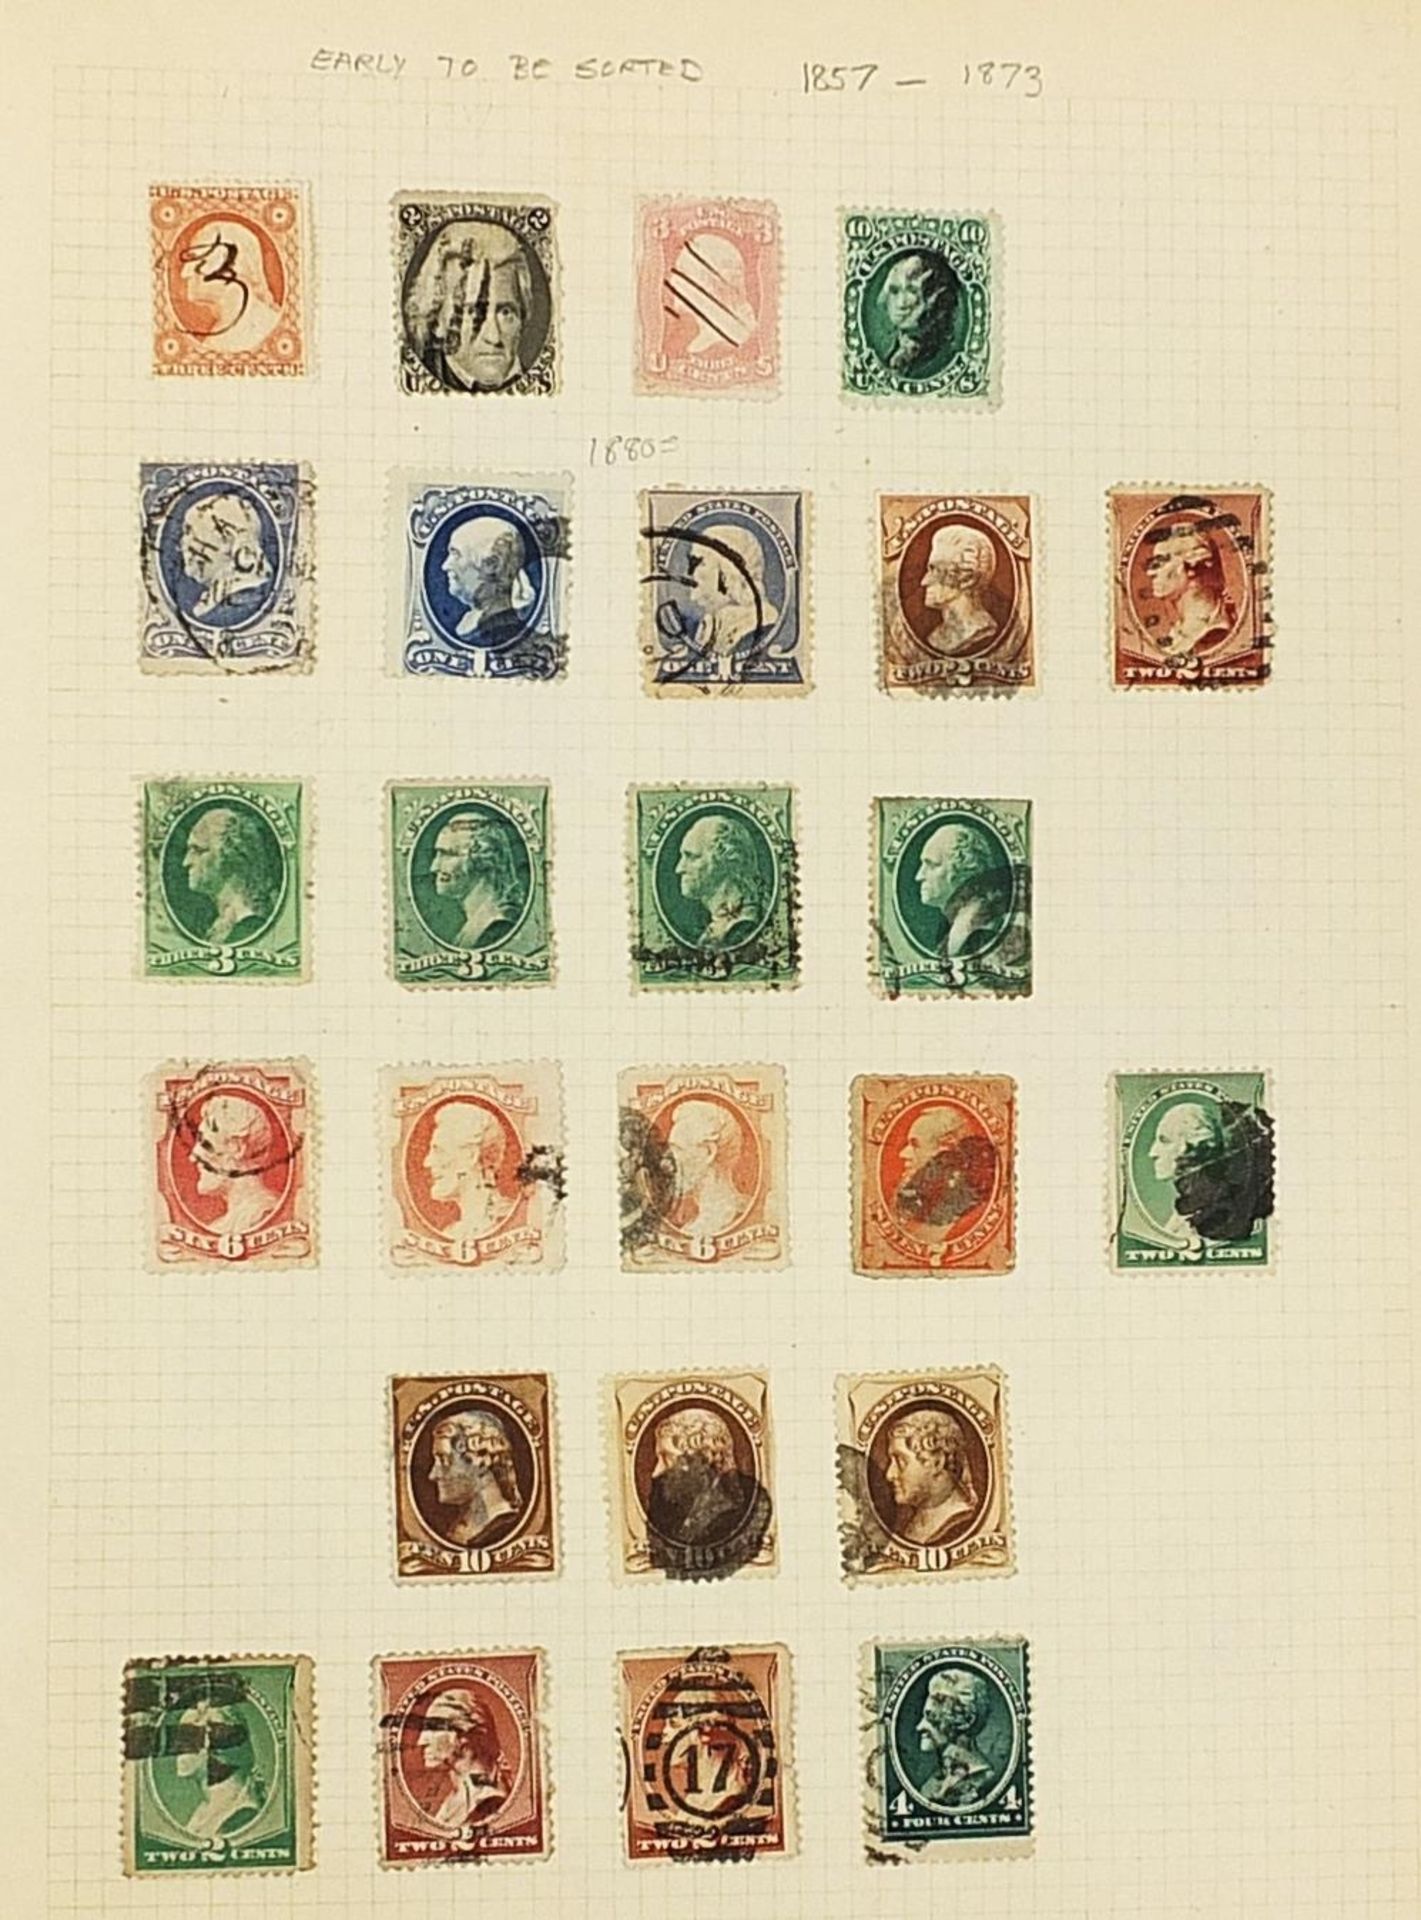 United States of America stamps from the early Presidents to 1950, arranged in an album - Image 3 of 6